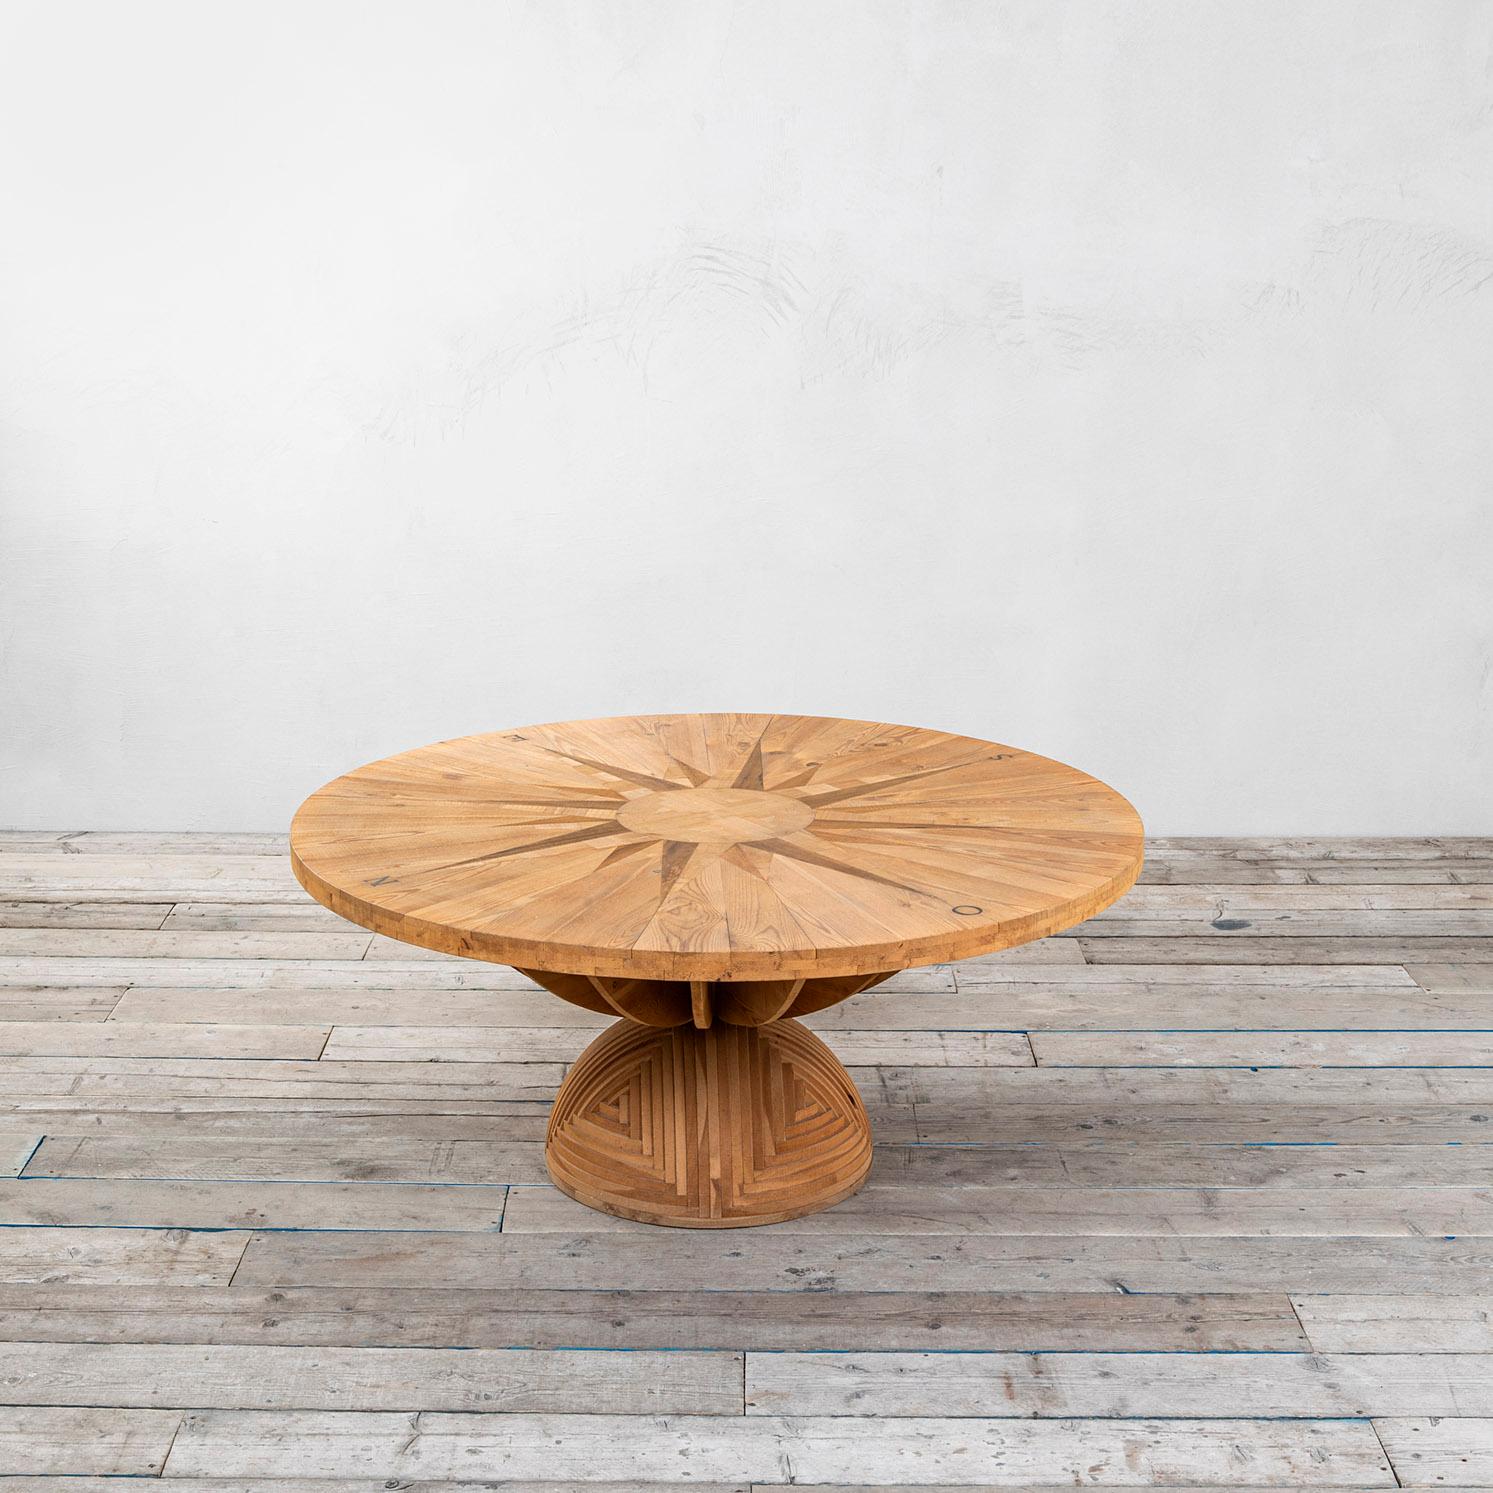 Very peculiar table designed by the artist Mario Ceroli in '70s and produced by Poltronova. The model of the table is 